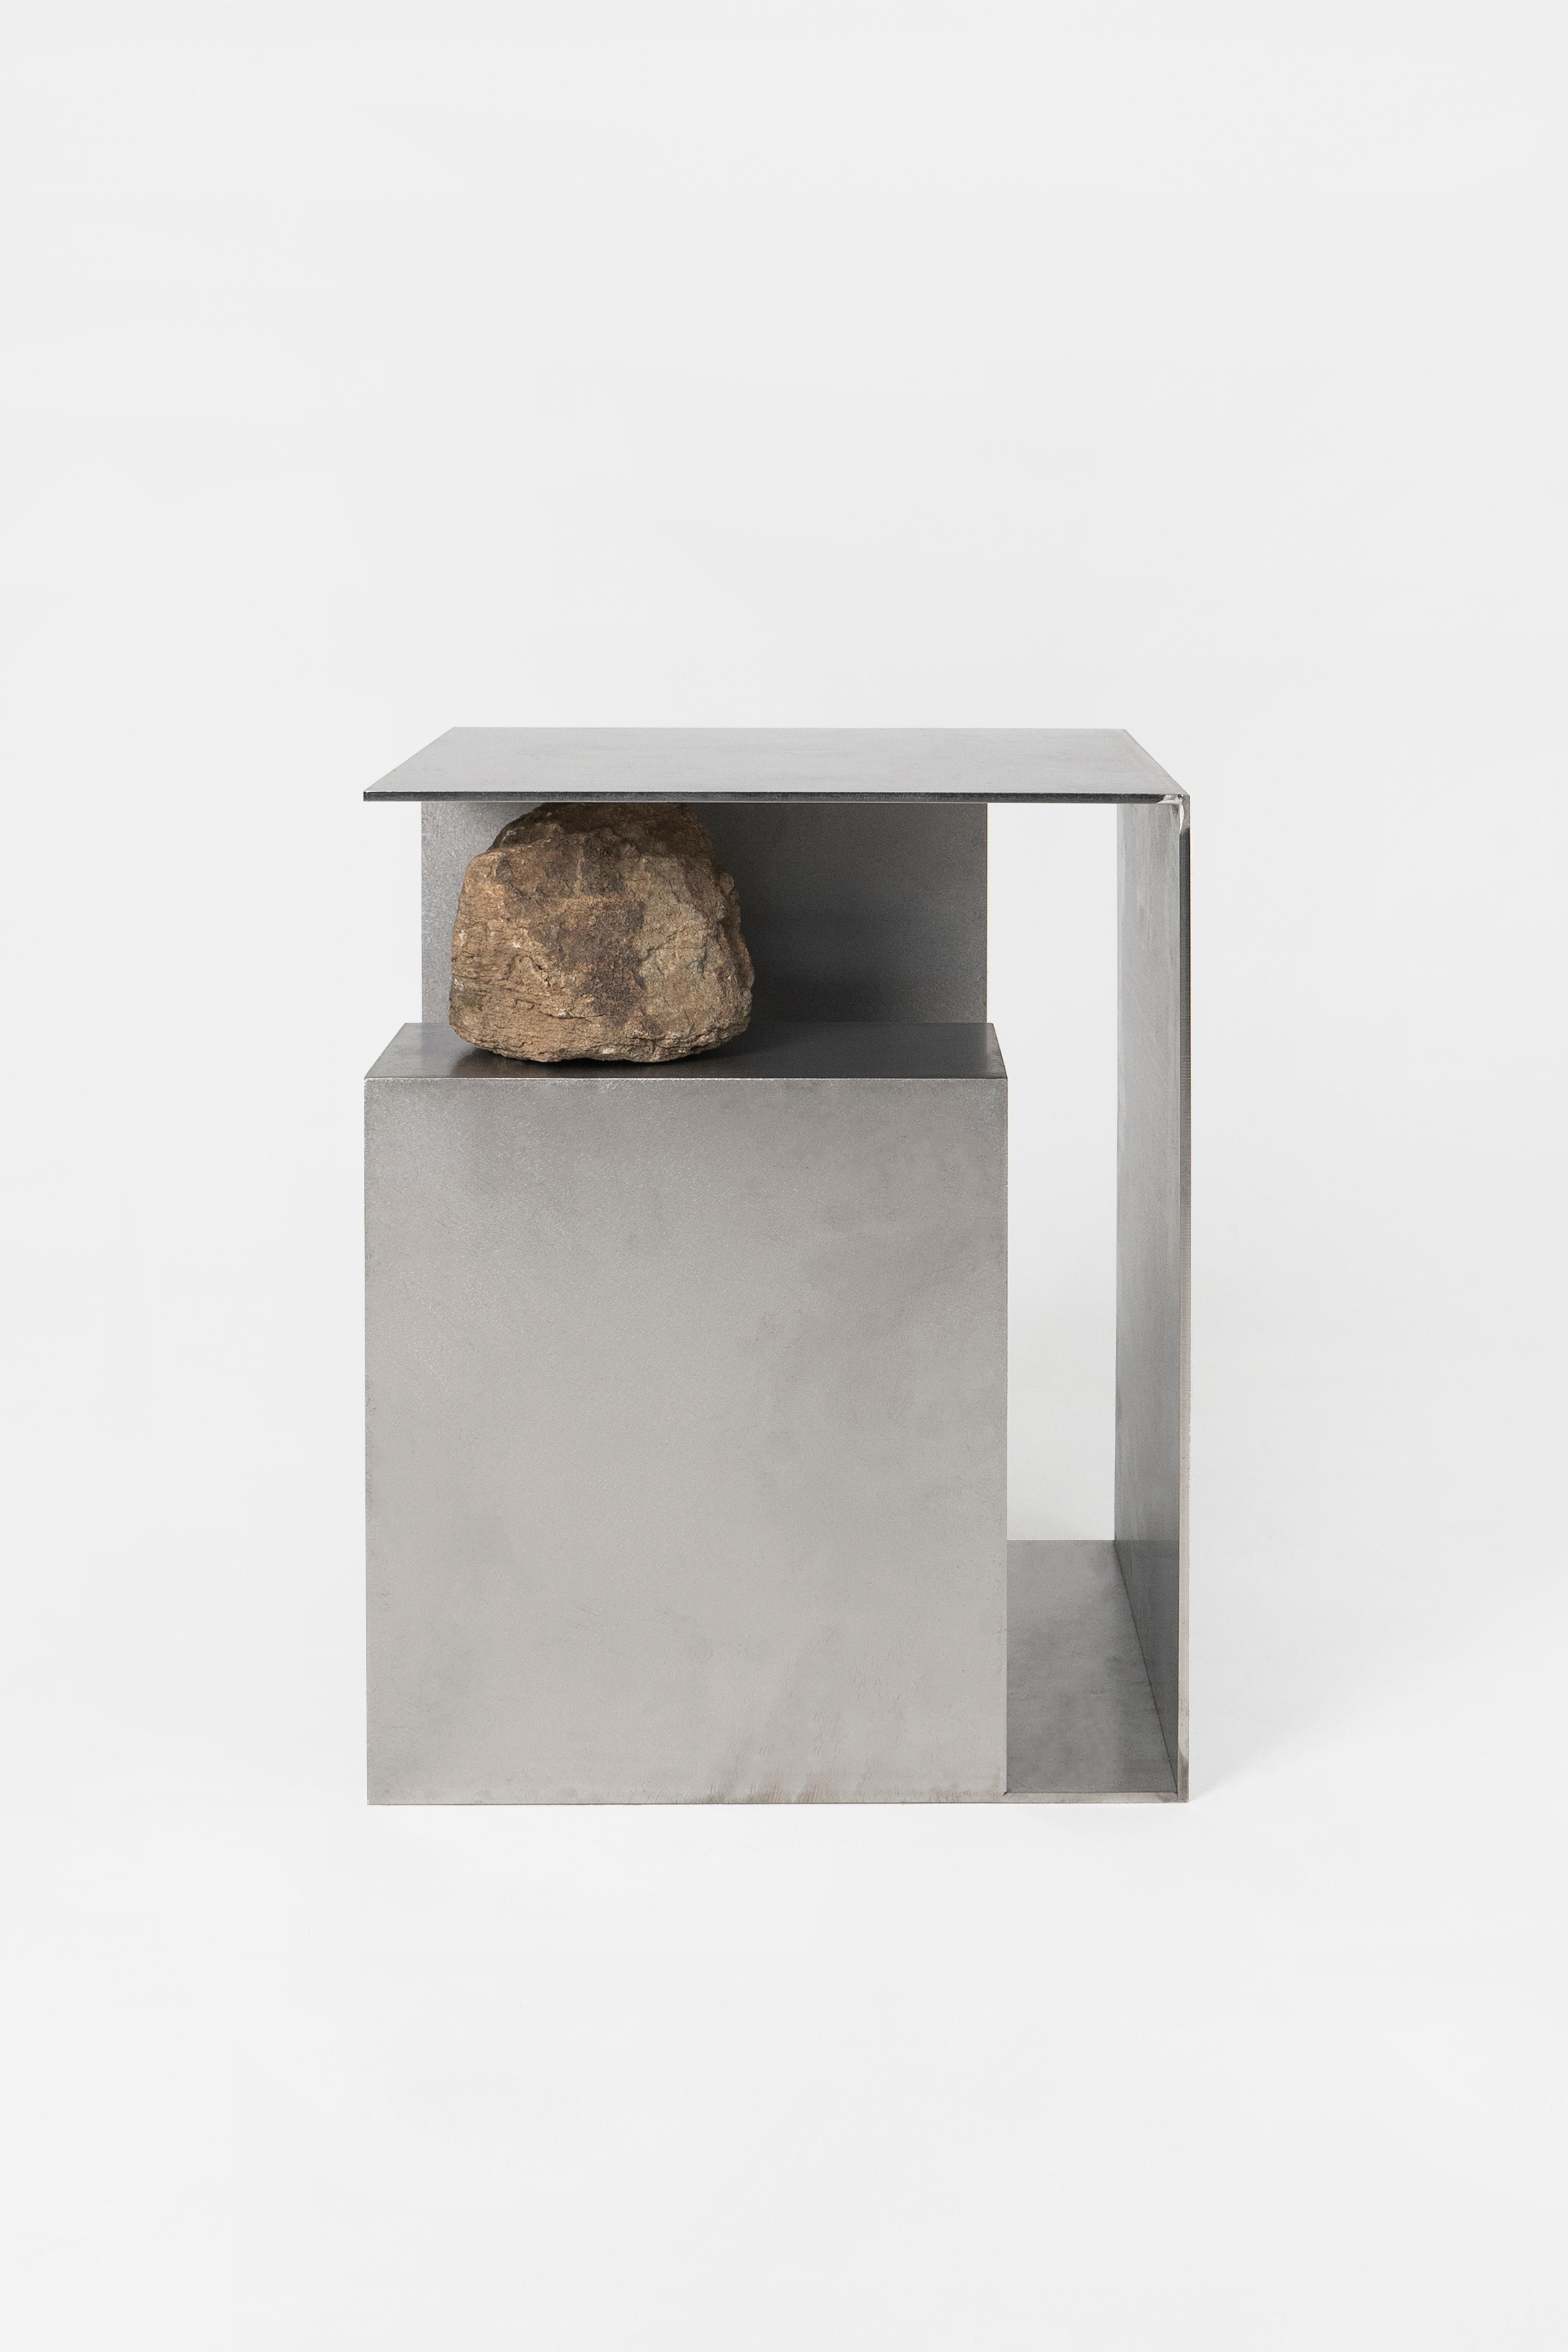 Modern Proportions of Stone Stool by Lee Sisan